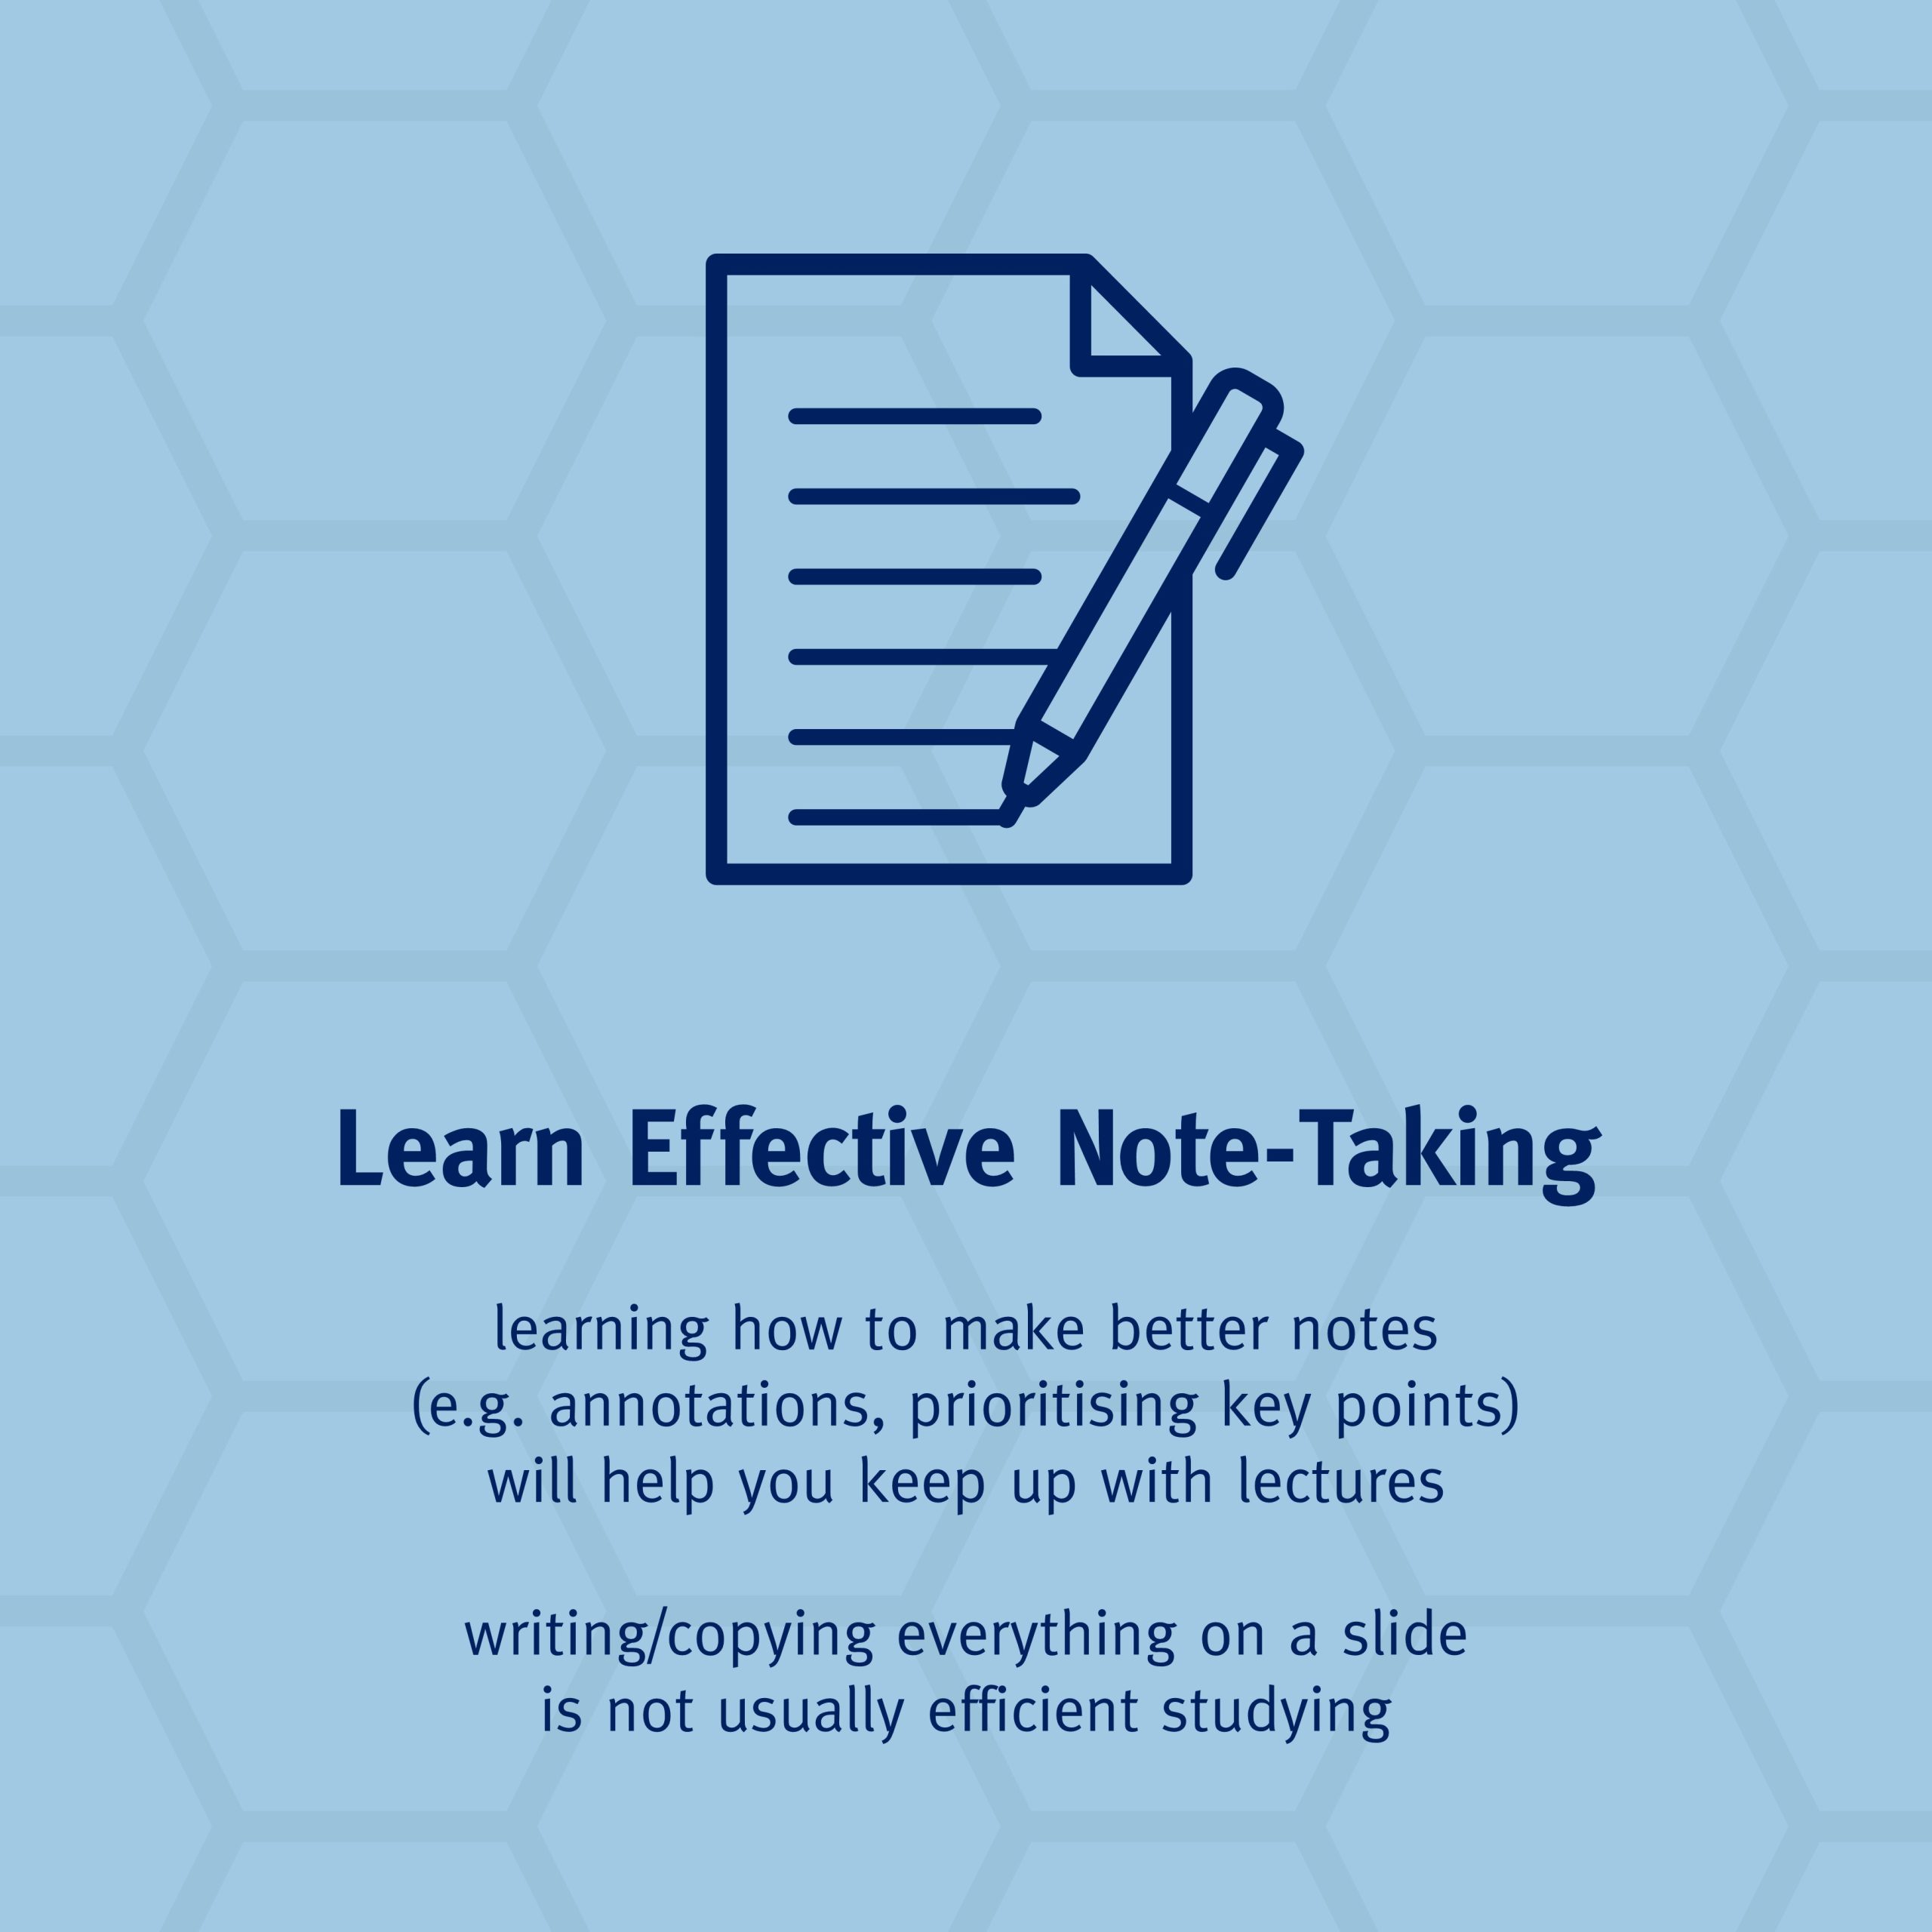 Effective note-taking, Imperial students